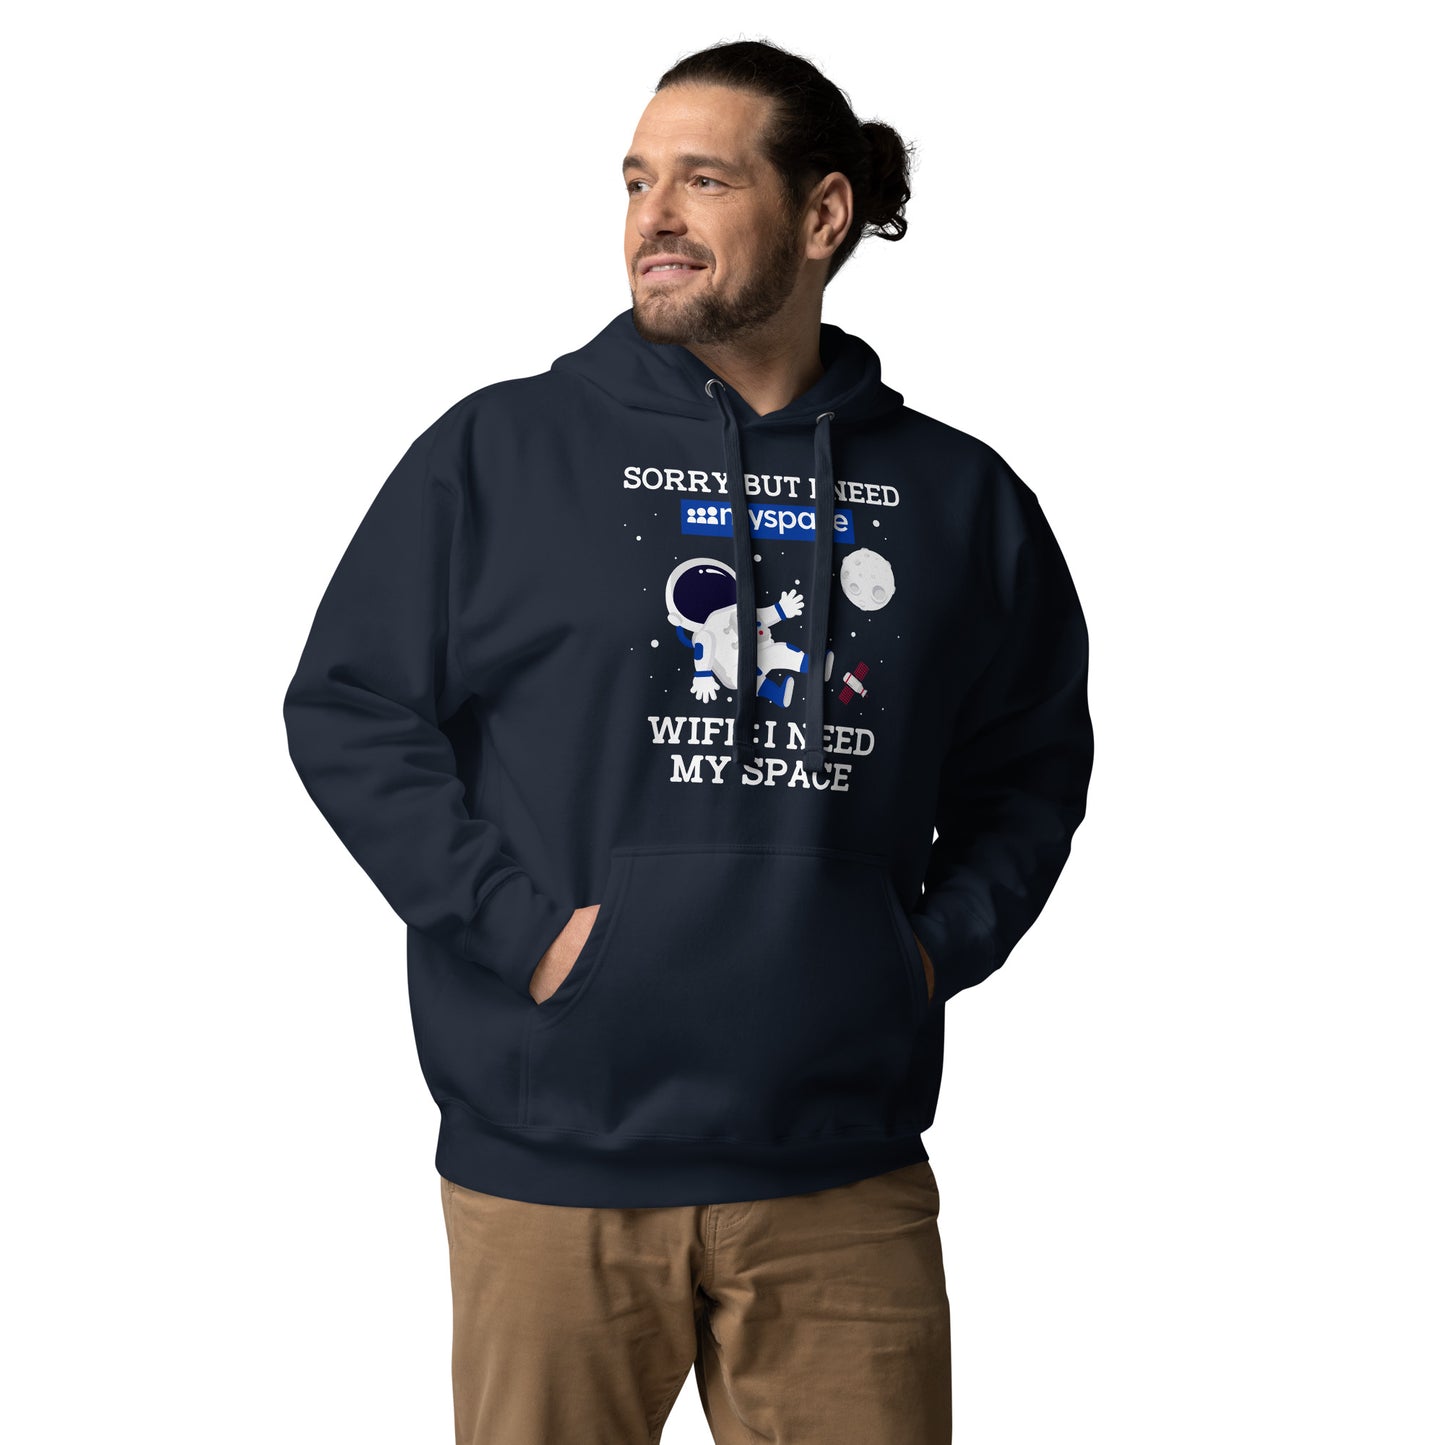 Sorry But I Need Wife I Need My Space Unisex Hoodie